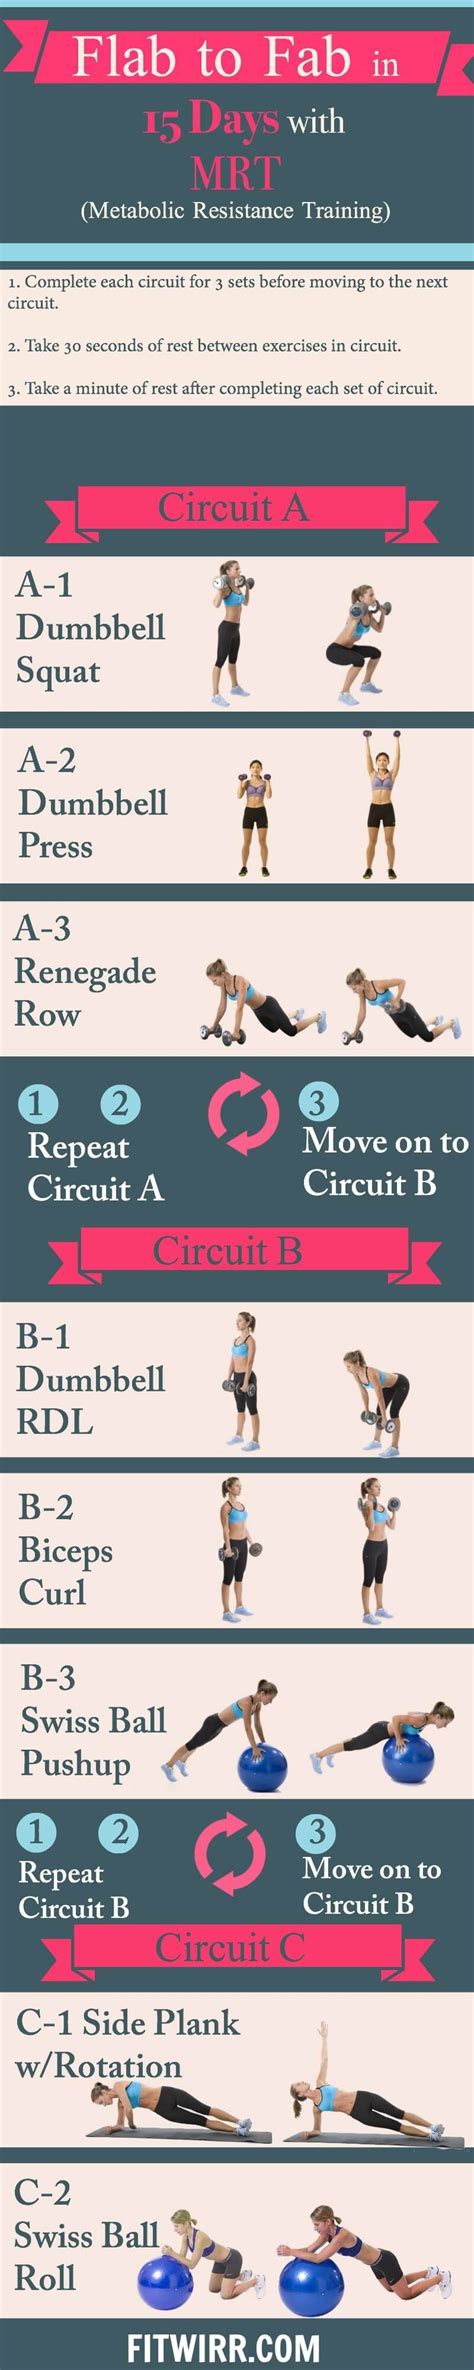 Best Bodyweight Workout For Beginners At Home Fitwirr Exercise